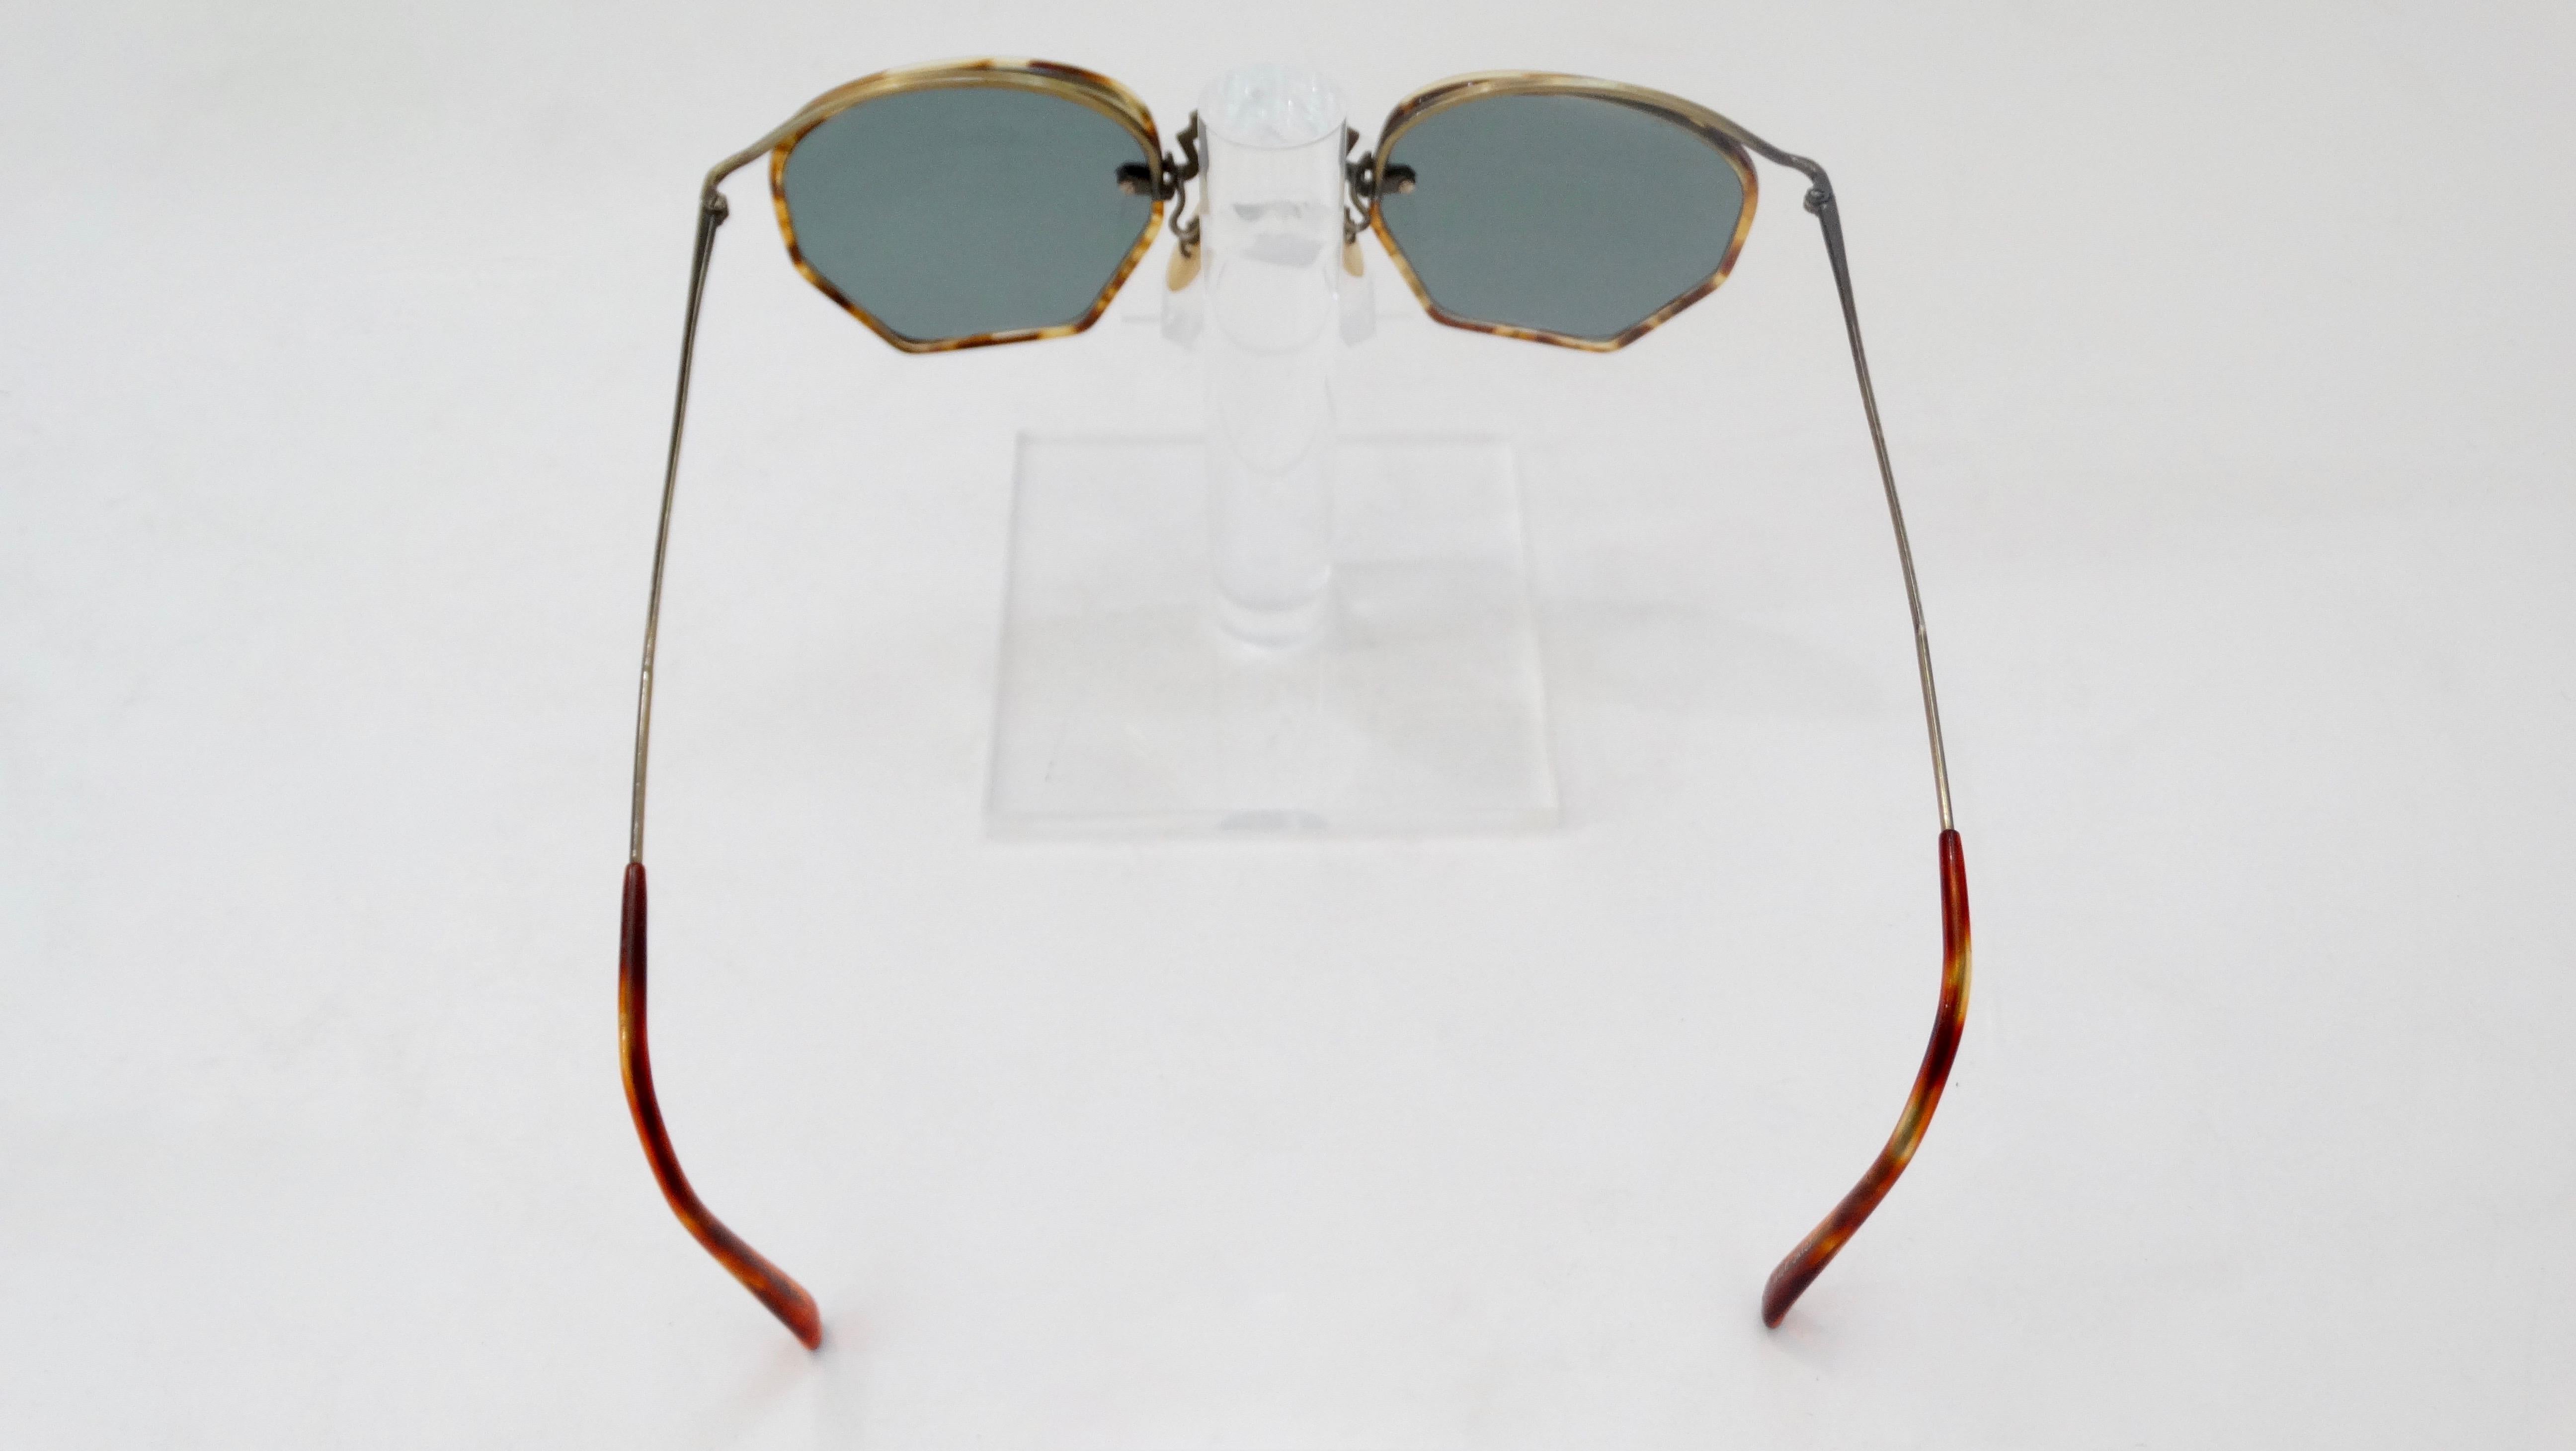 Gray Oliver Peoples 1980s Tortoise Shell Sunglasses